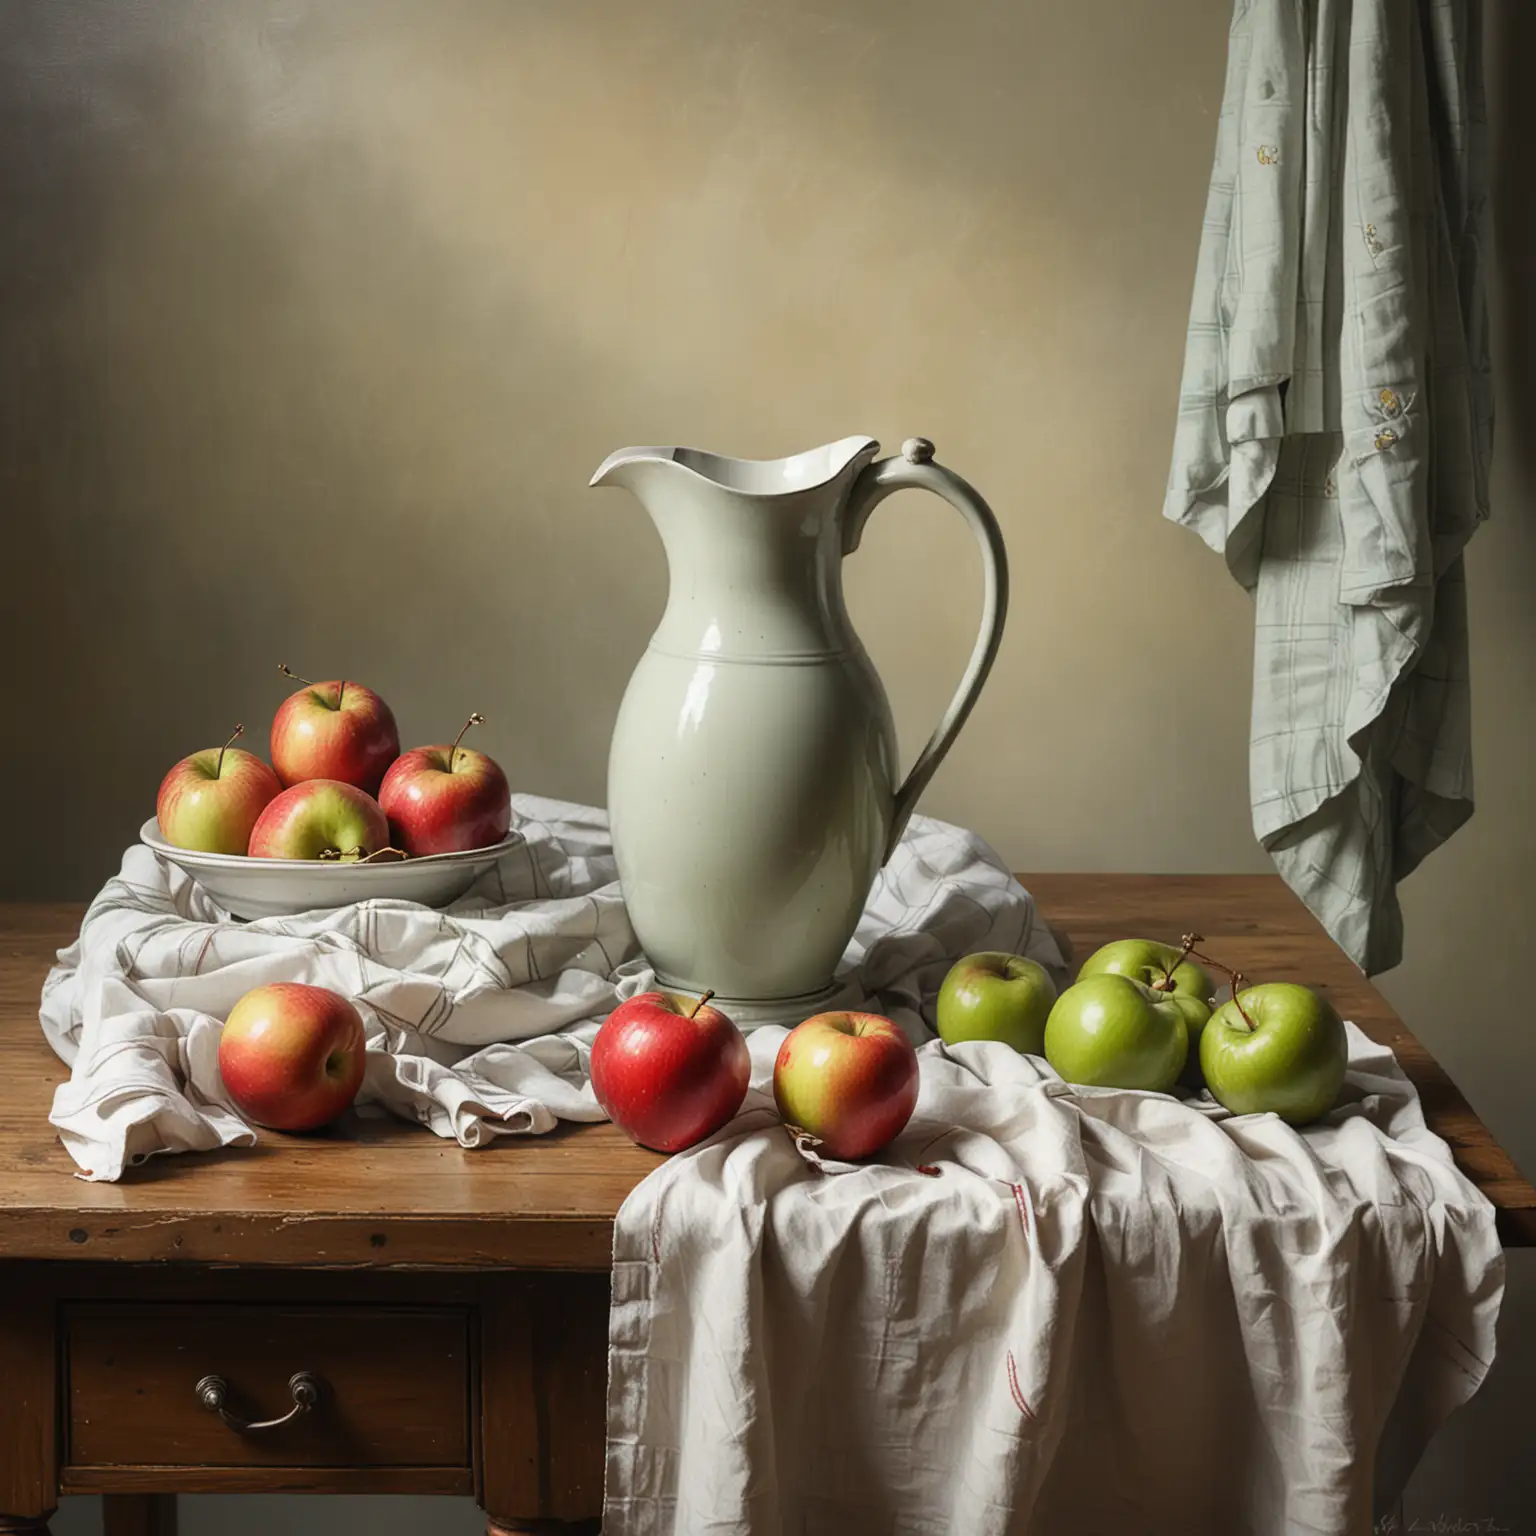 A PAINTING OF A STILL LIFE, OF A TALL PITCHER ON A TABLE WIYH A CLOTH, AND RED AMD GREEM APPLES